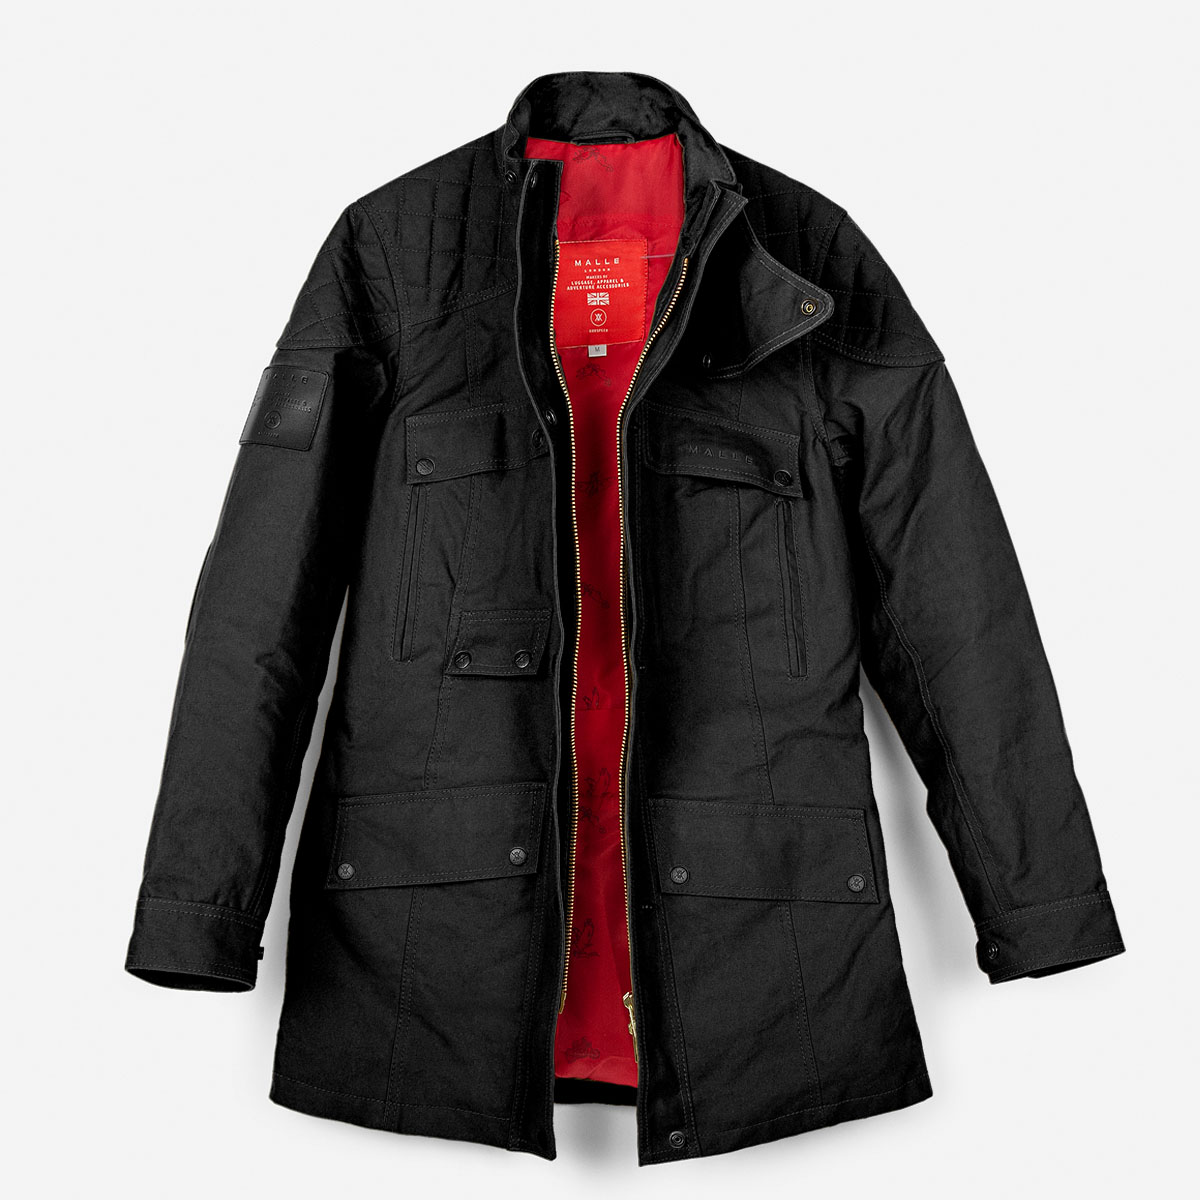 PMUYBHF Male Black Jacket Men with Hood Male Autumn and Winter Multi Bags  Outdoor Fishing Photography Mountaineering Cycling Clothing Work Jacket